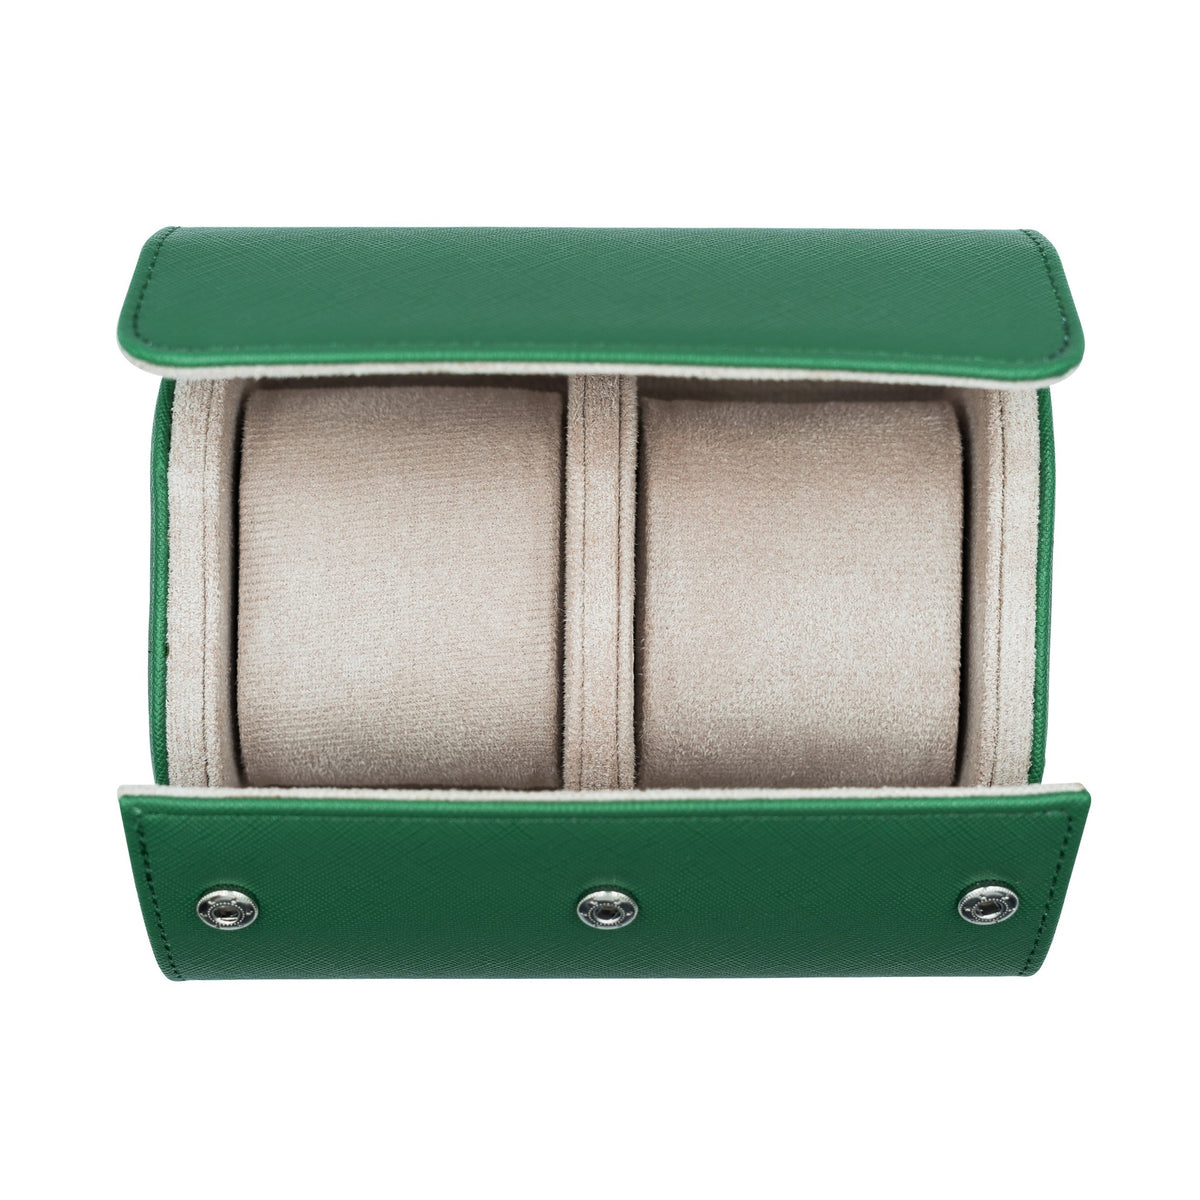 Saffiano Leather Watch Case in Green (2 Slots)